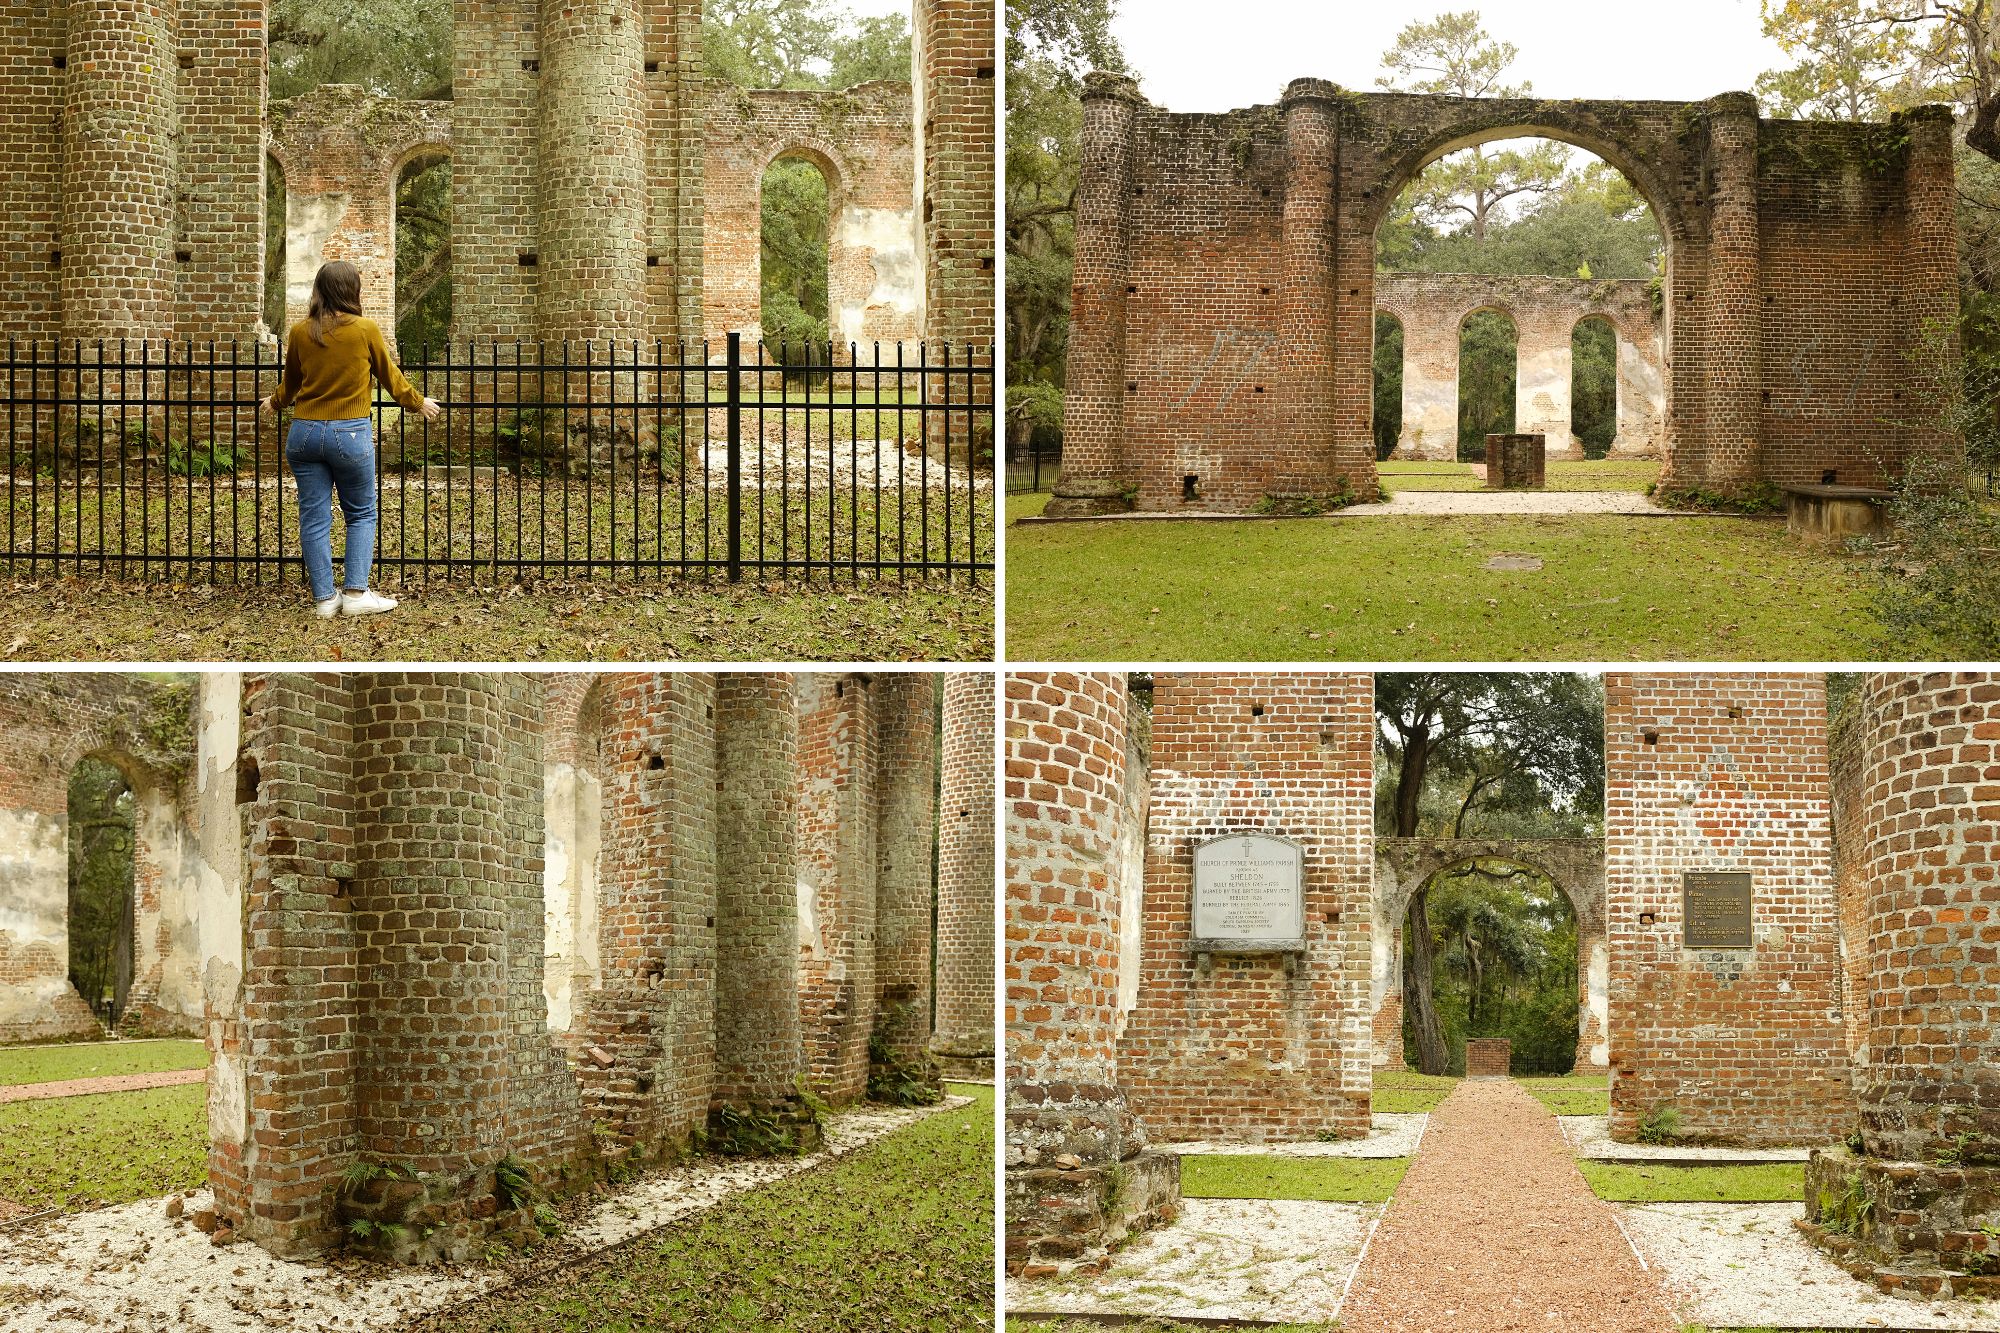 Collage of images at Old Sheldon Church Ruins